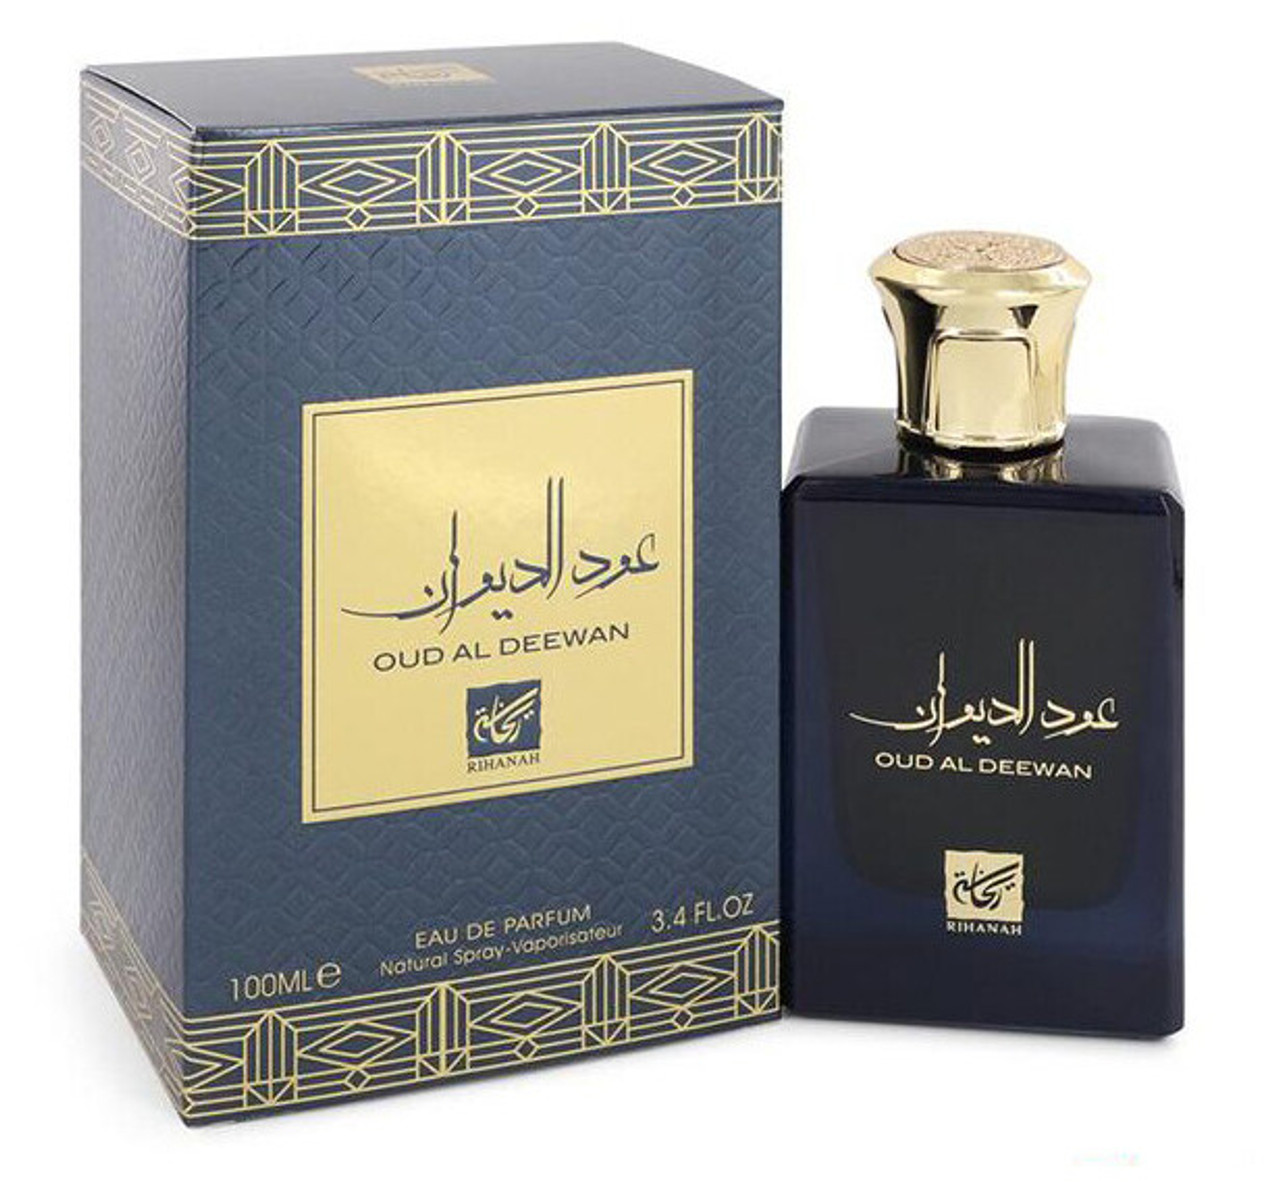 plz contacts this number - Reeh Al madina oud and perfumes